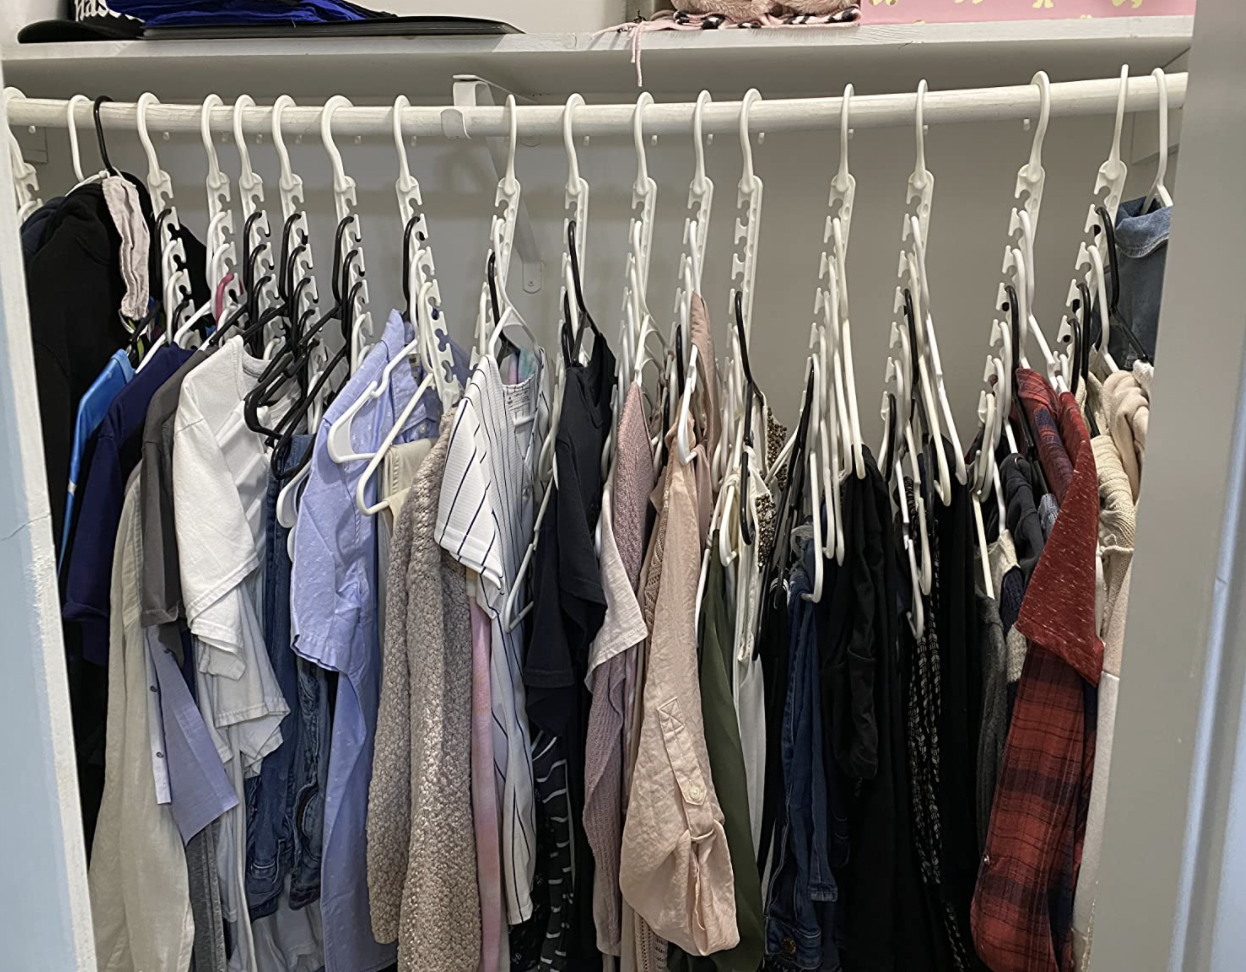 reviewer&#x27;s clothes hung vertically using the cascading hangers